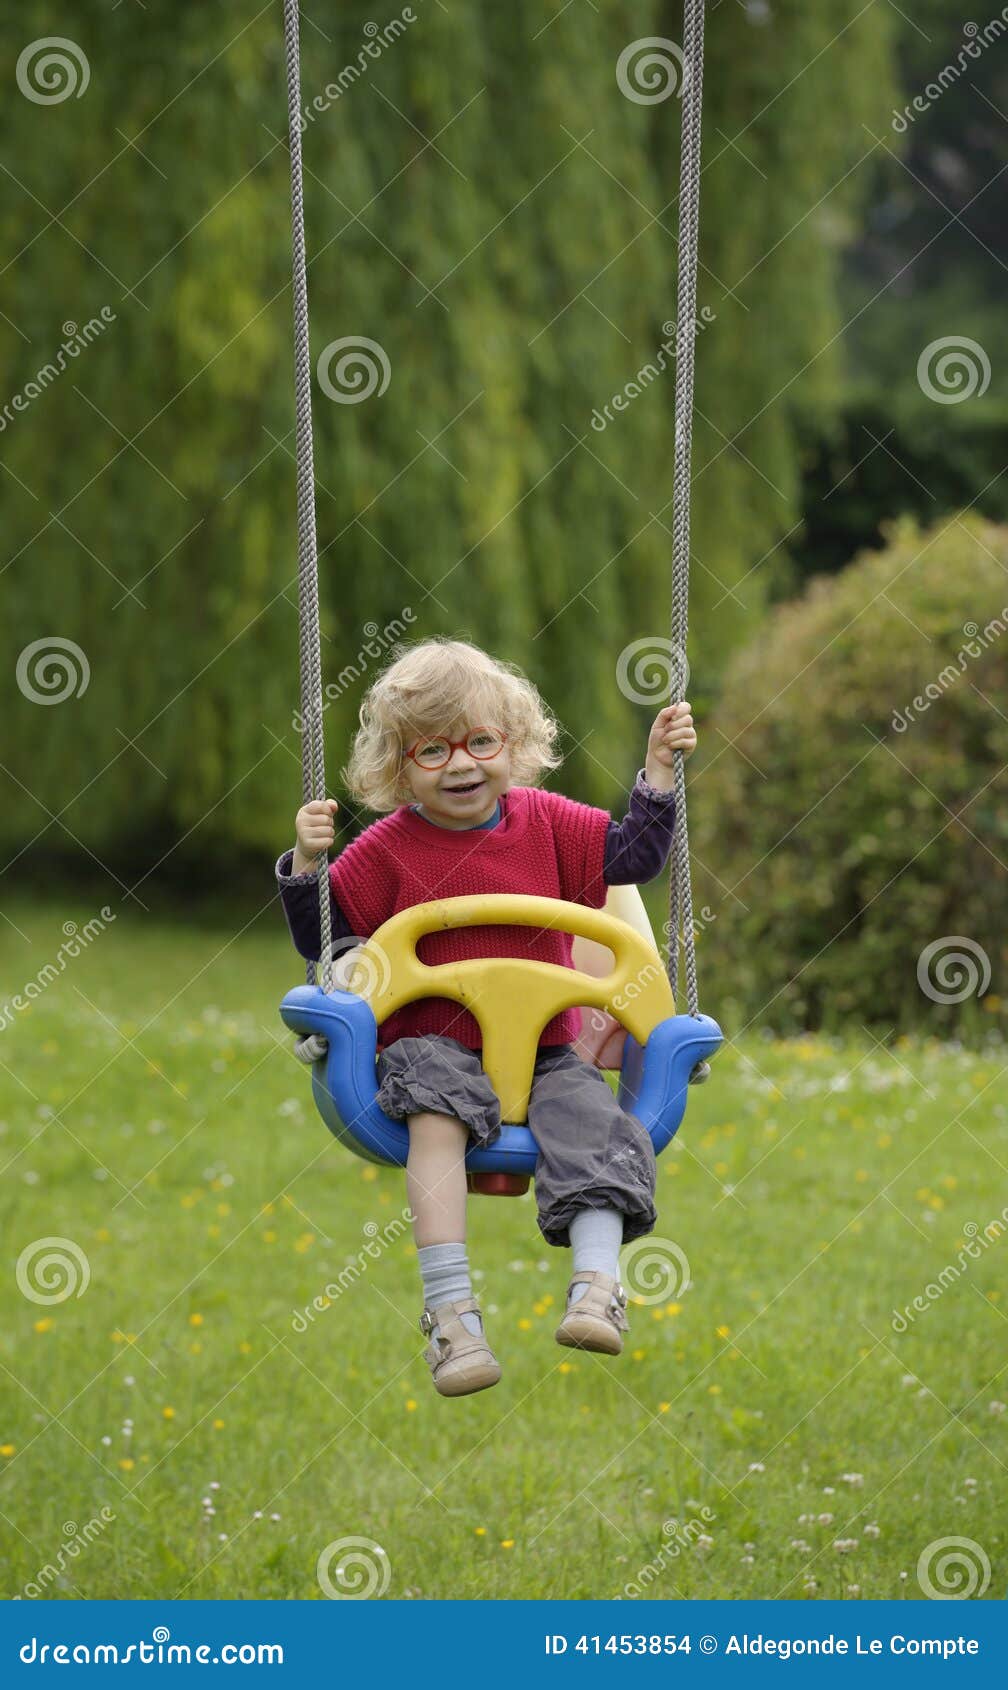 Little toddler on a swing,outdoors